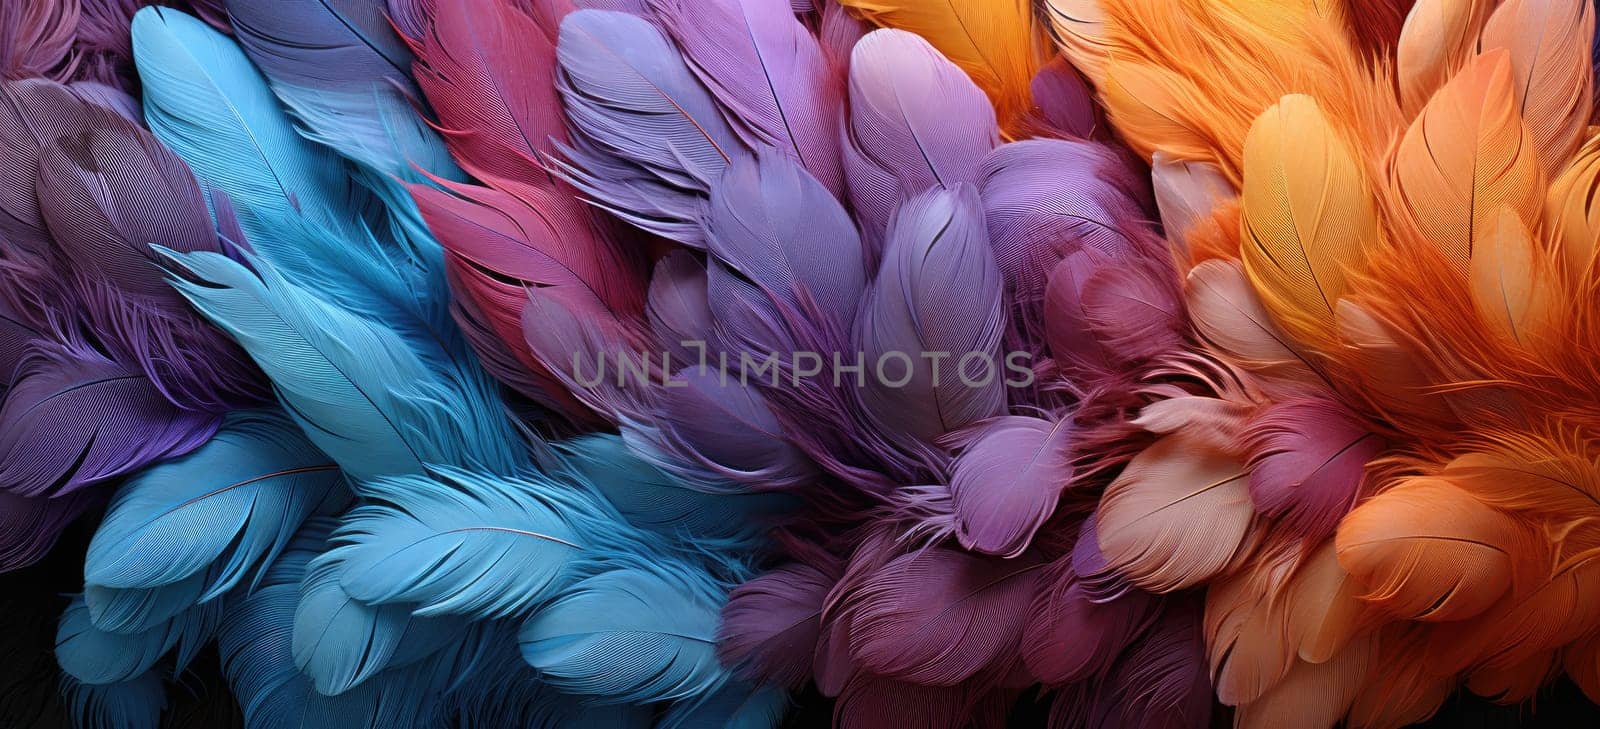 Bright texture photo with large bird feathers in various shades